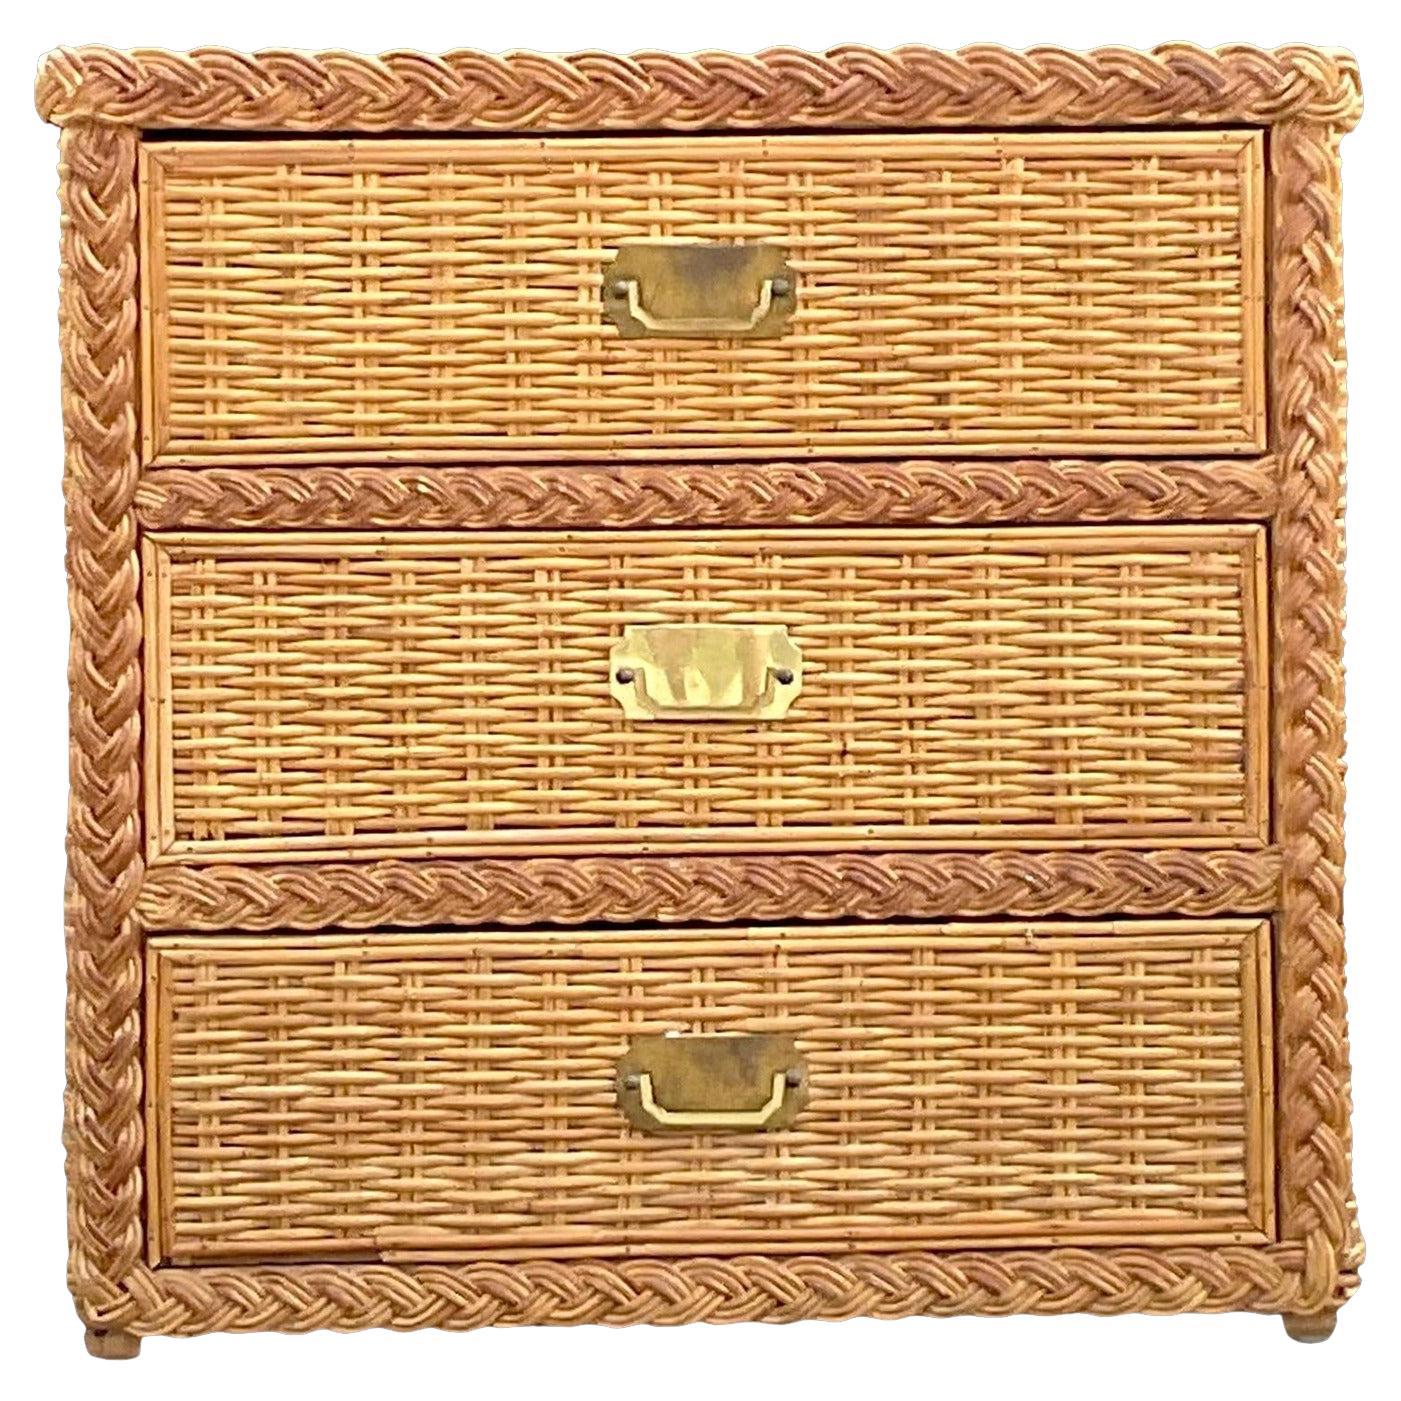 Late 20th Century Vintage Coastal Braided Rattan Chest of Drawers